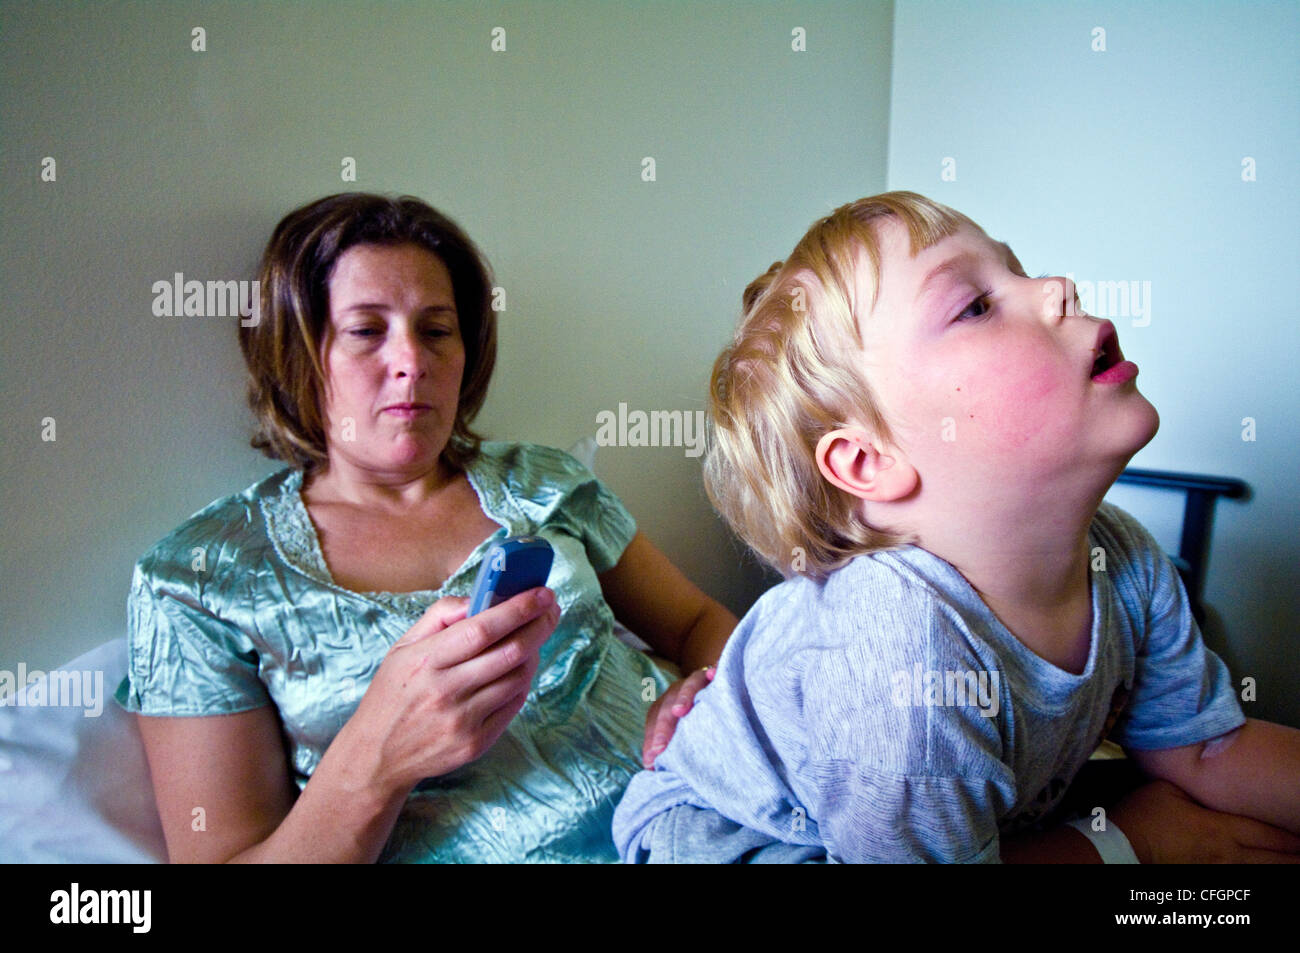 A mother sends a message on her cell phone in a hospital waiting room. Stock Photo